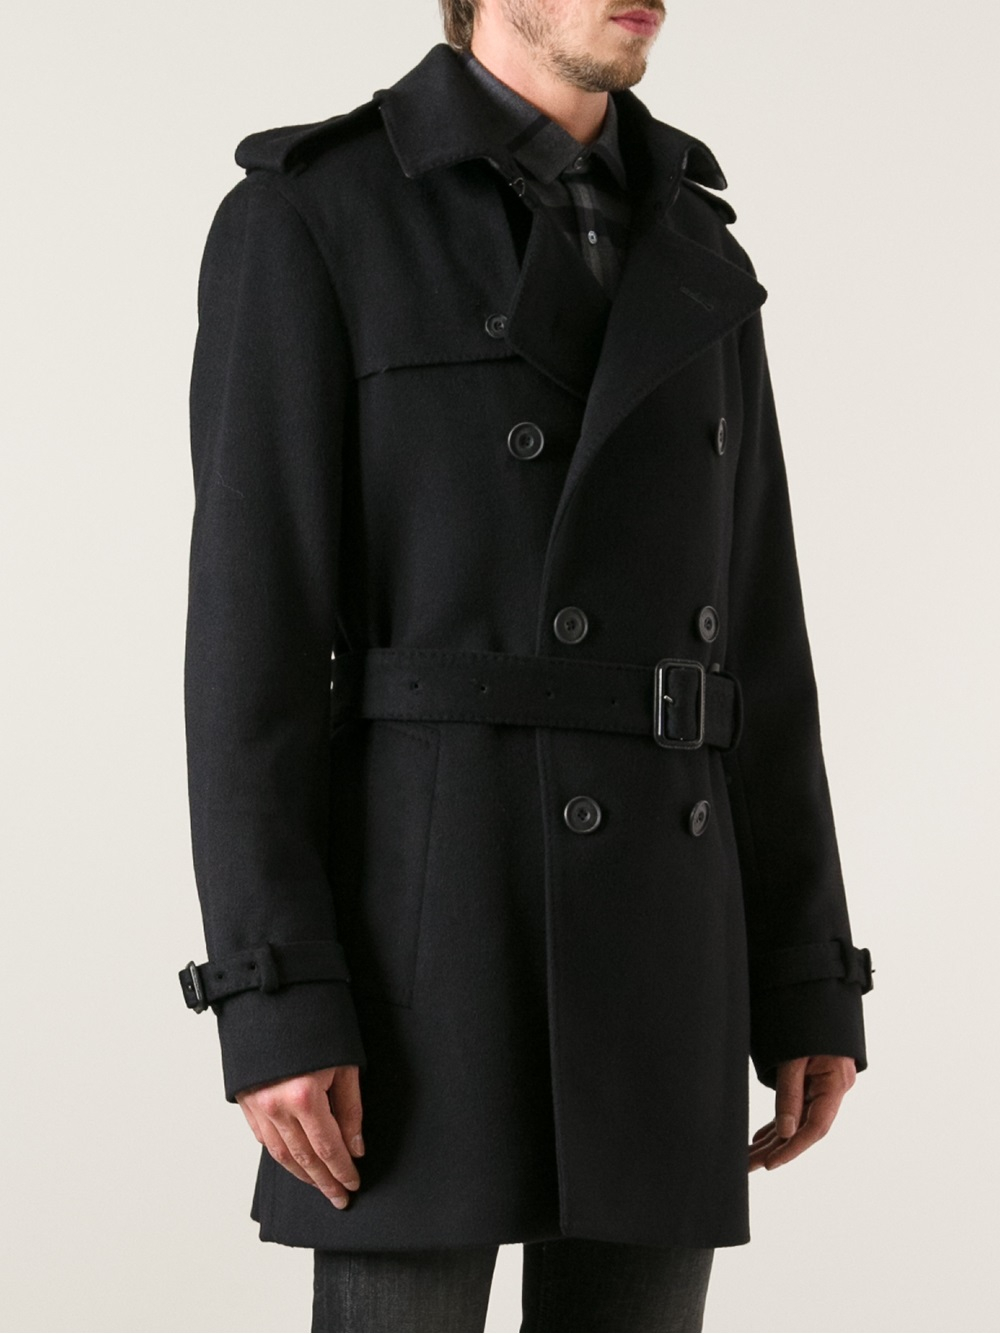 Burberry 'britton' Trench Coat in Black for Men | Lyst